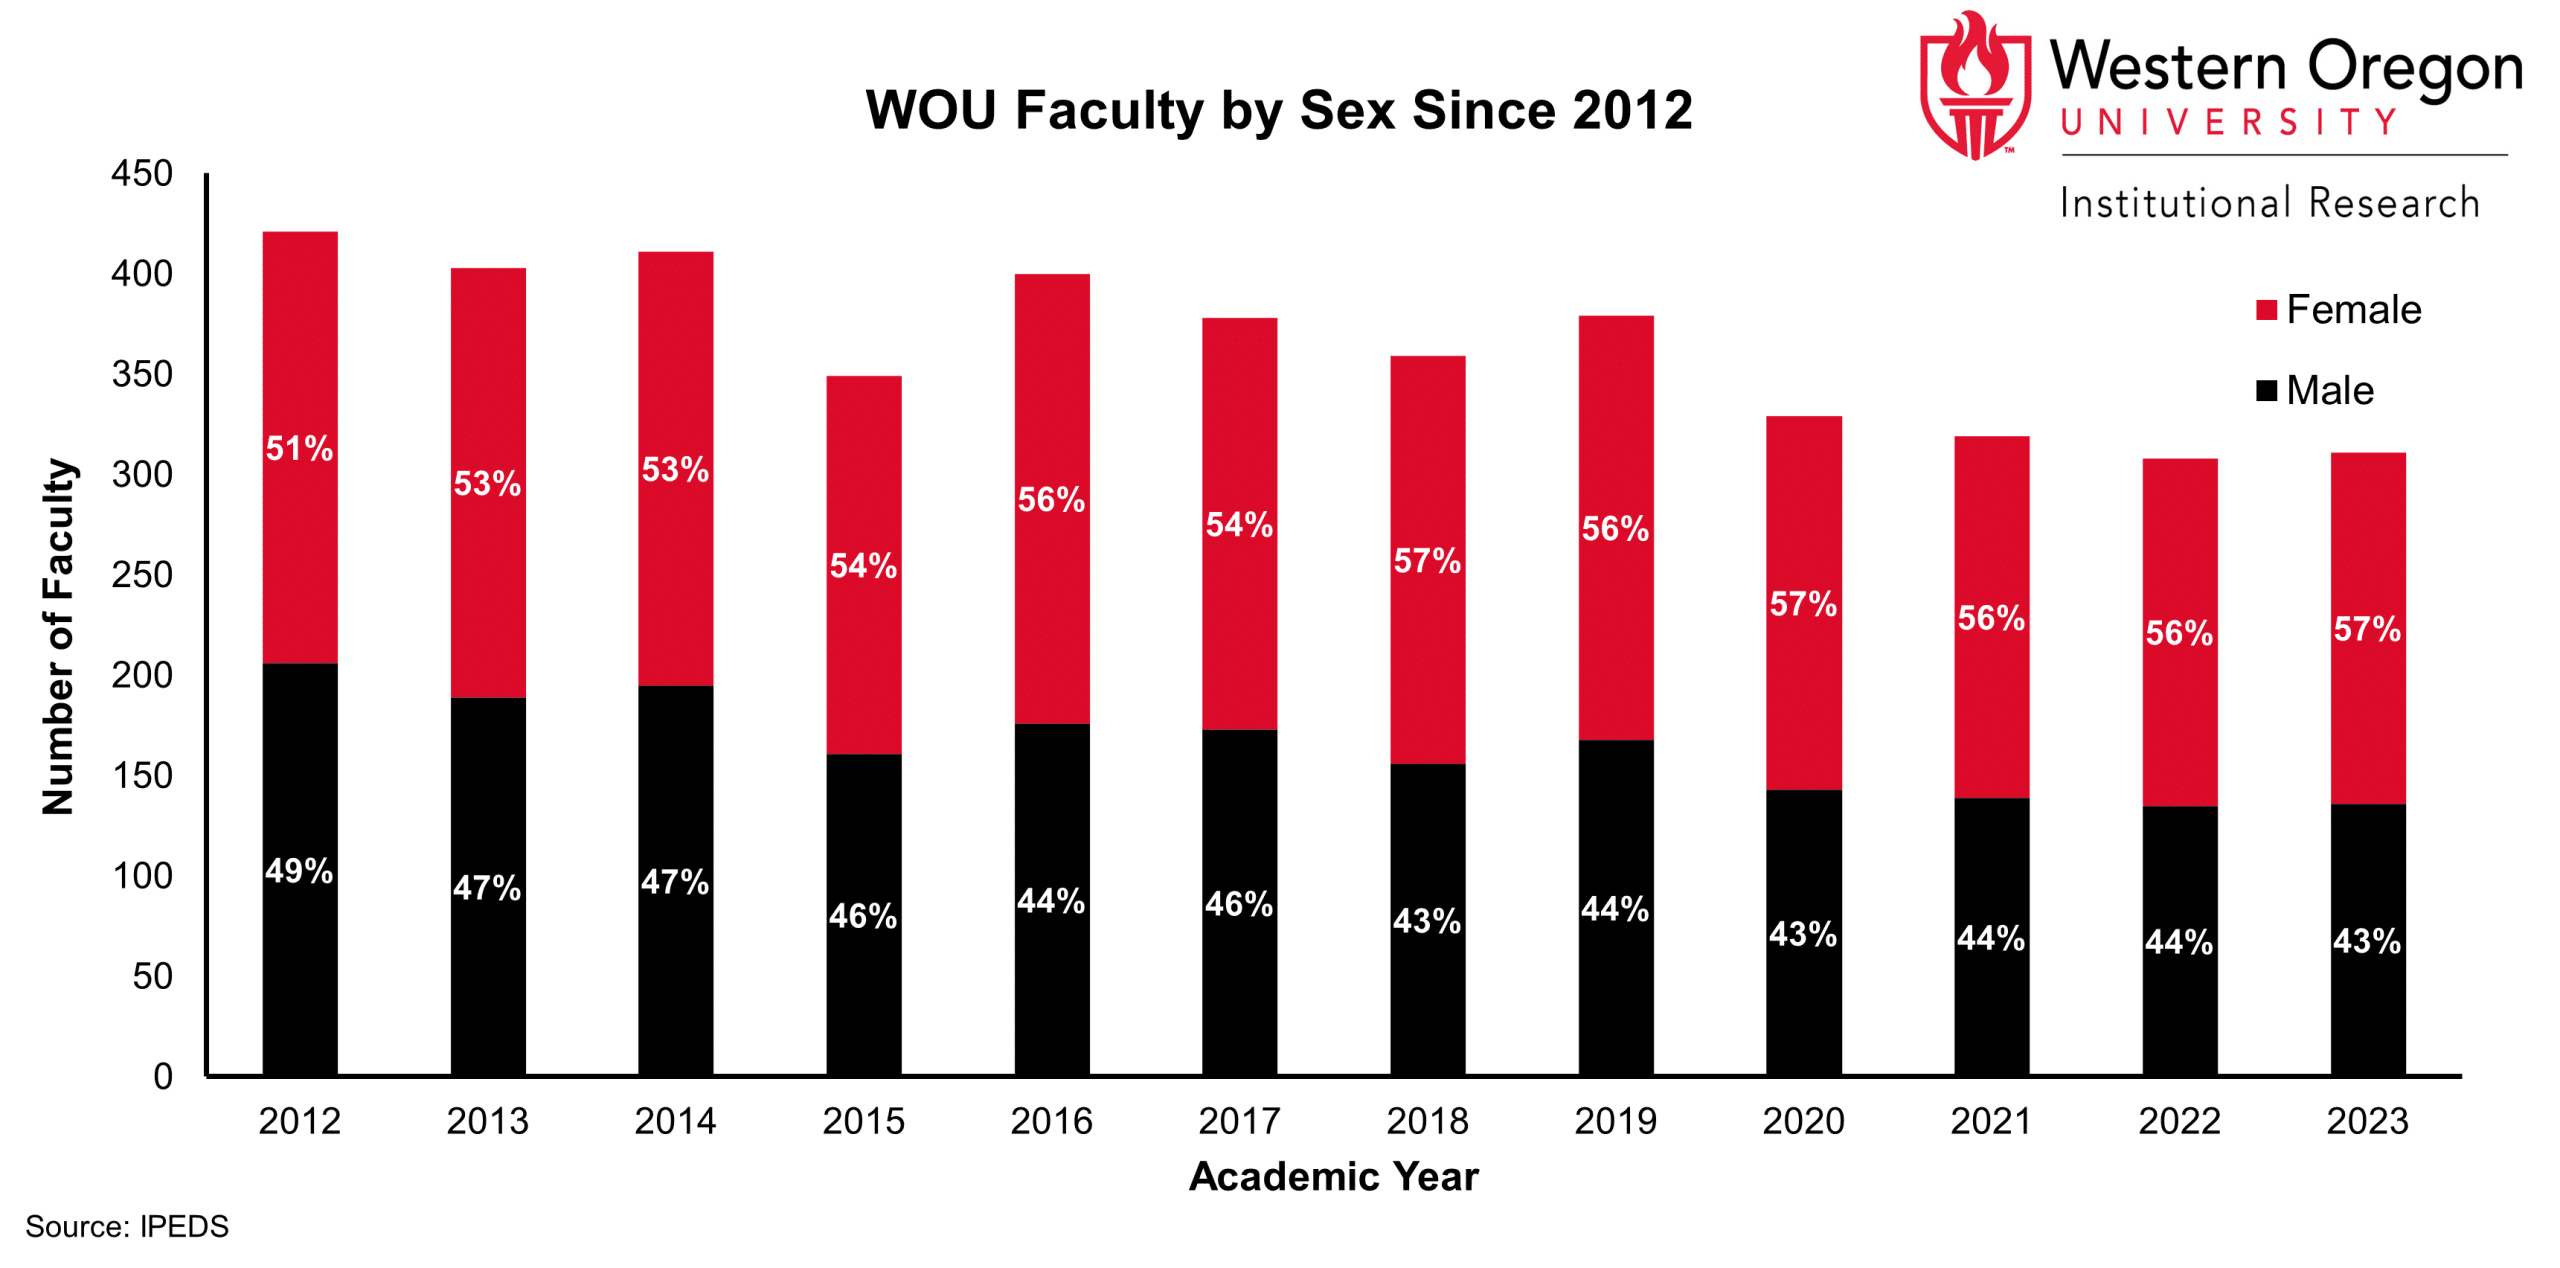 The total number of faculty has decreased since 2012, as has the percentage of male faculty.